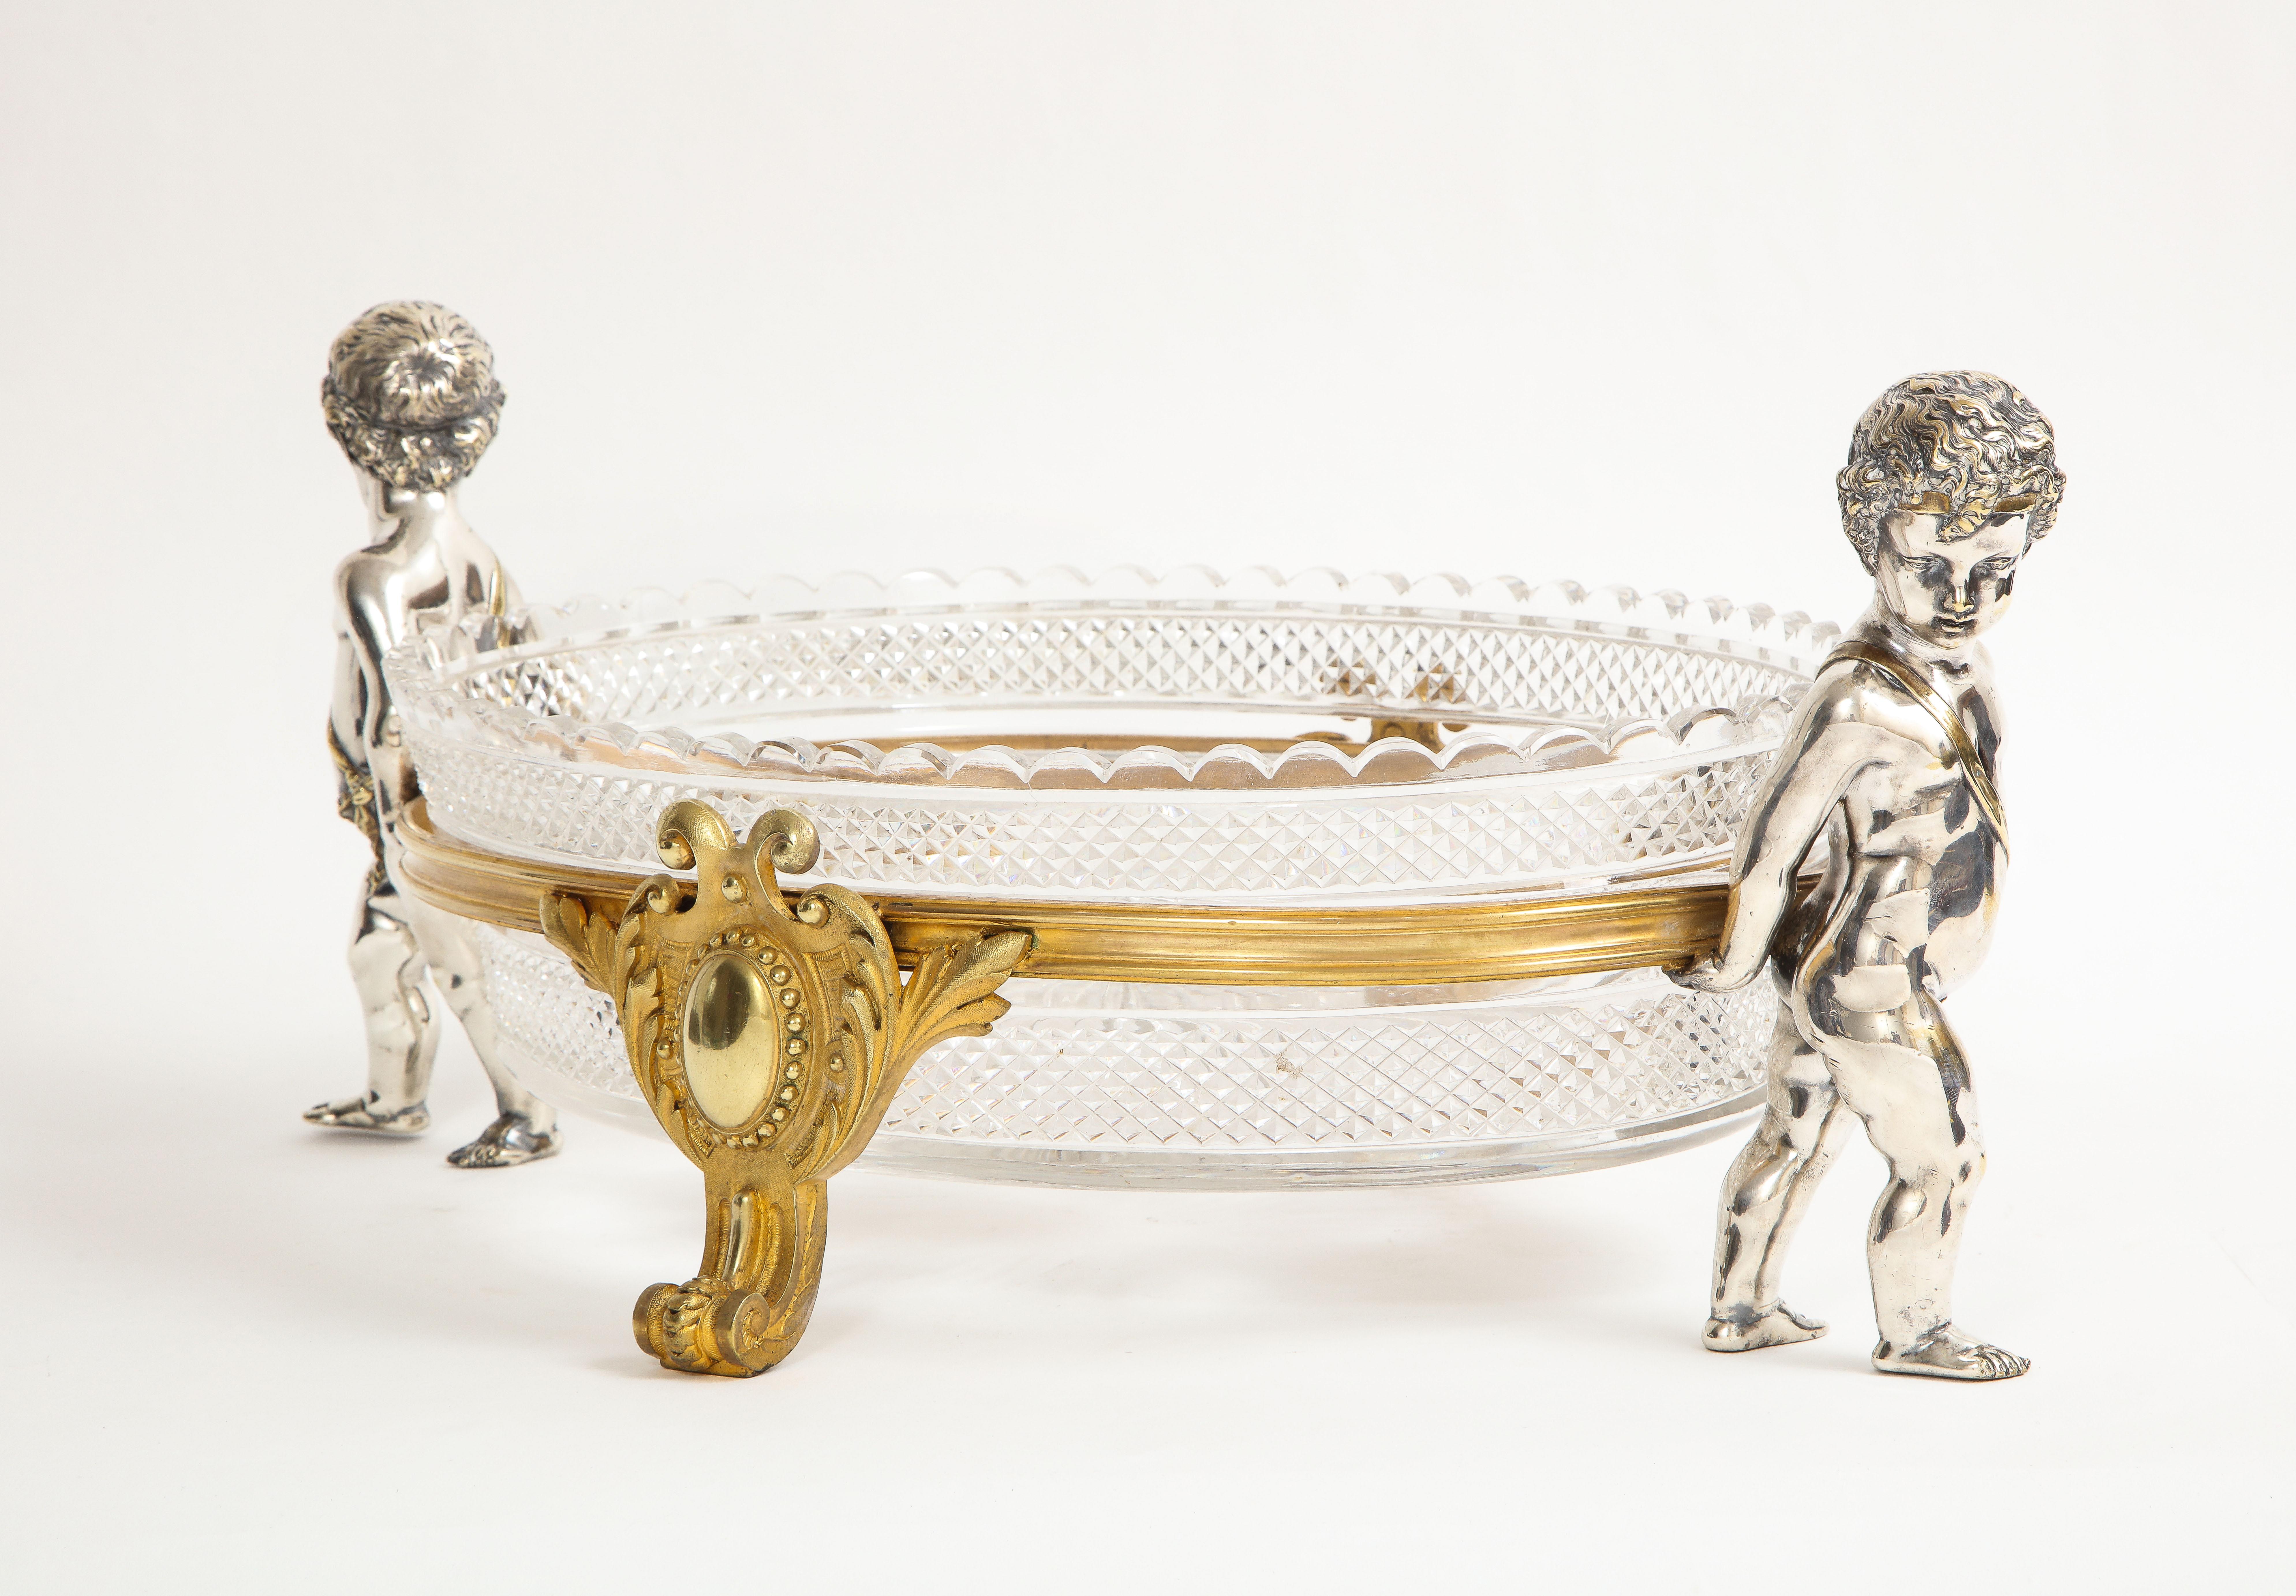 French Silvered & Gilt Bronze Putti Mounted Crystal Centerpiece Baccarat, 1800s For Sale 3